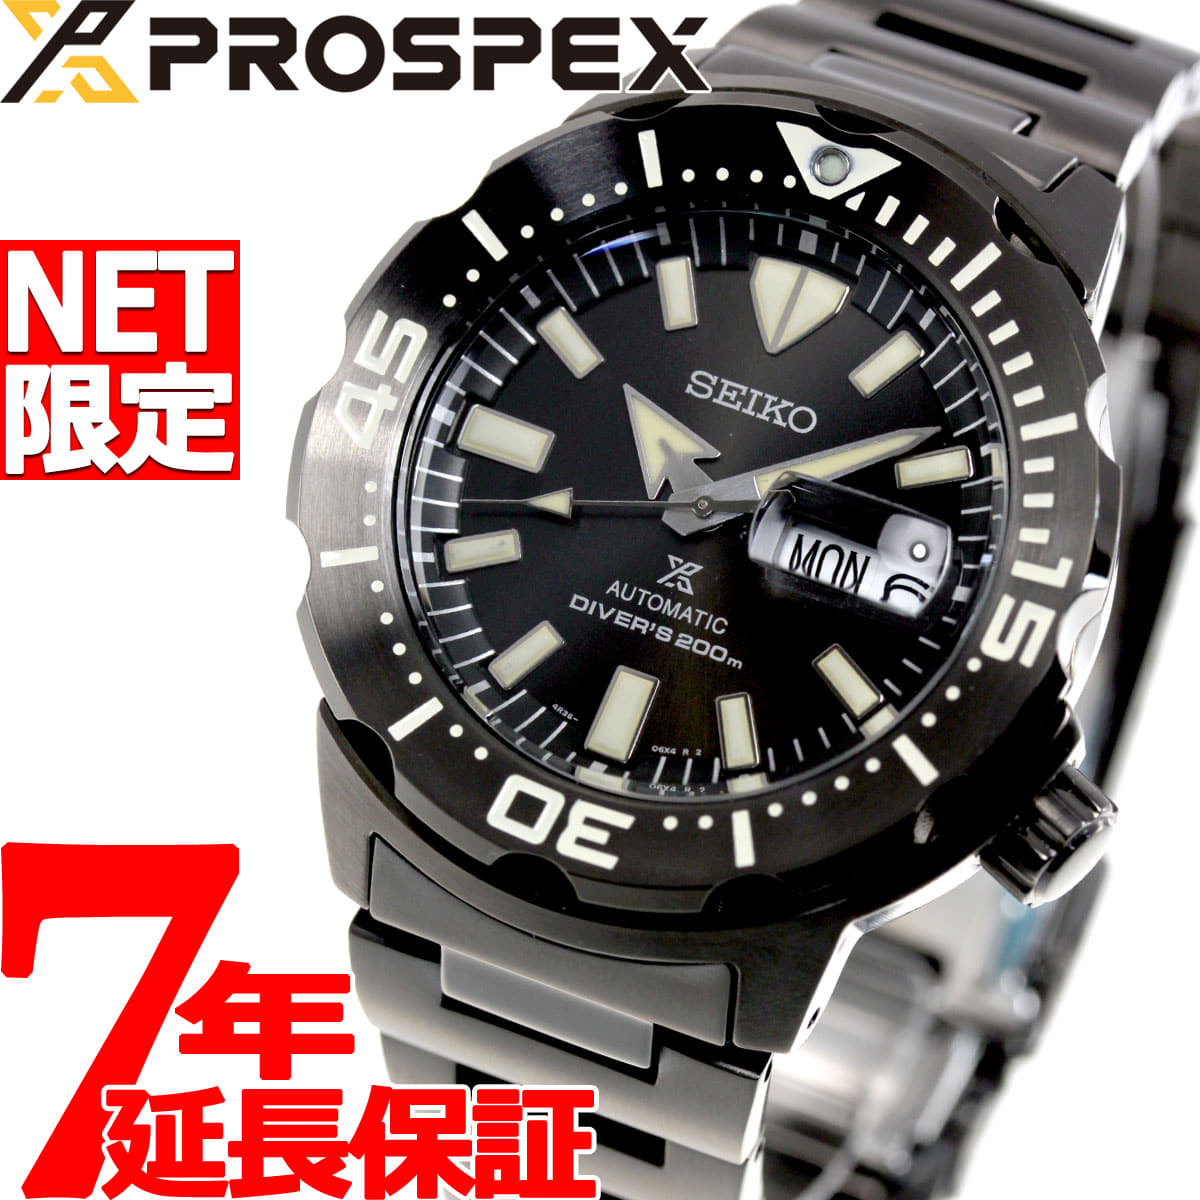 New]SEIKO PROSPEX distribution-limited model diver scuba mechanical  self-winding watch men monster MONSTER SBDY037 [2019 new works] - BE  FORWARD Store